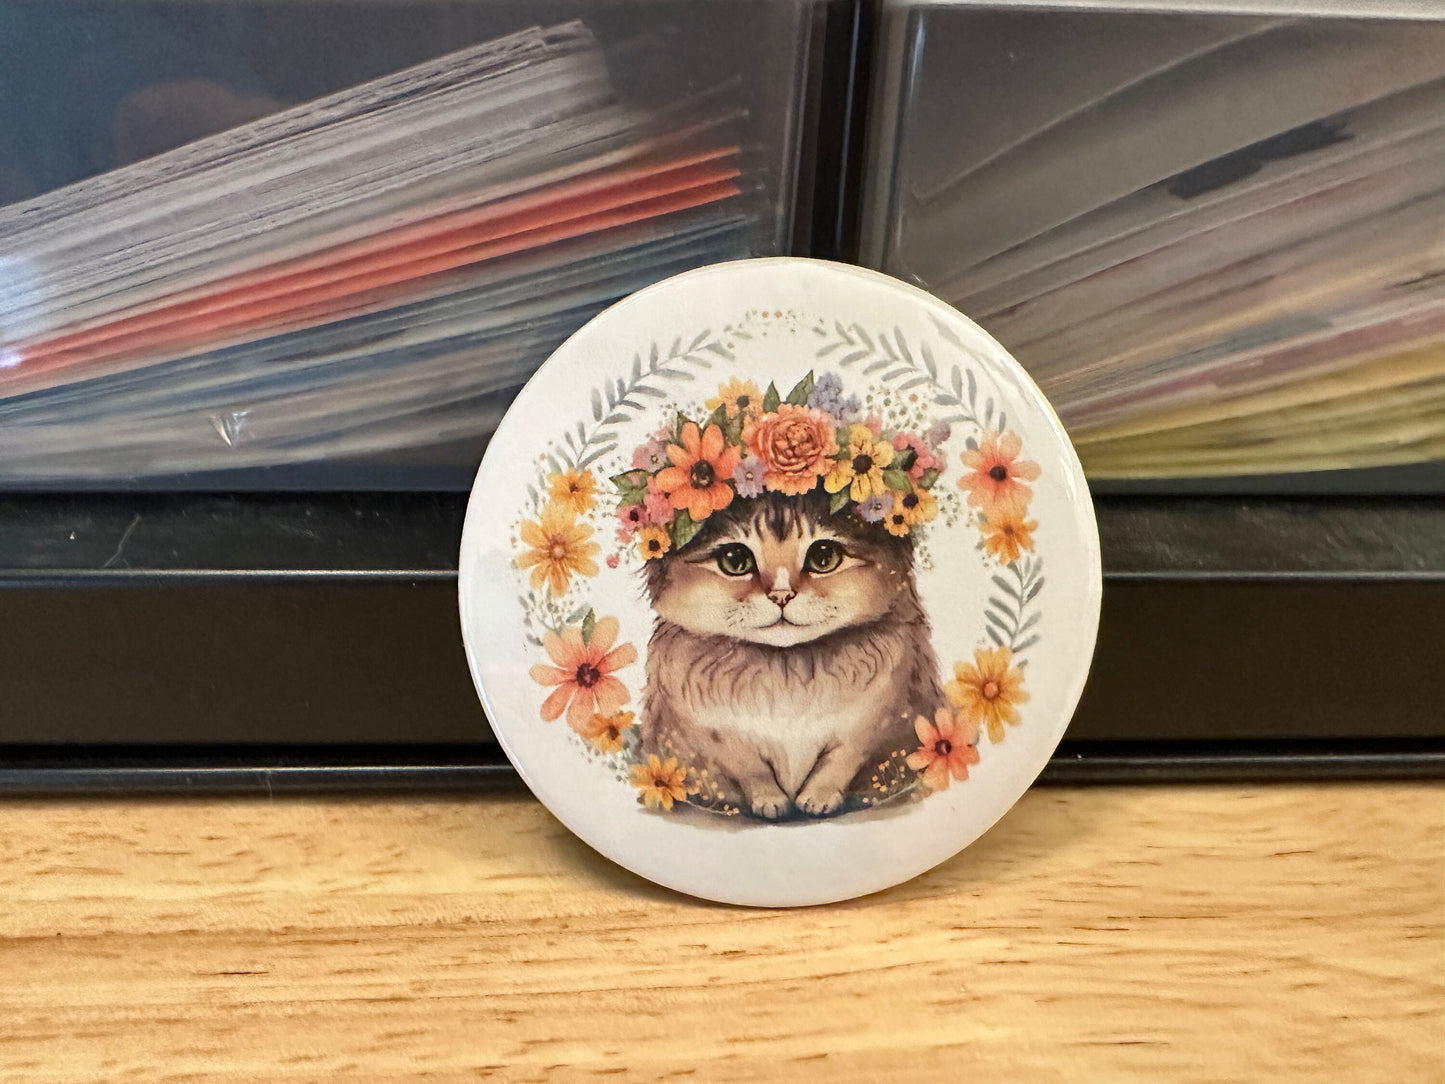 Flower Crown Cat 2.25" Button Pins or 1.25" Button options, Back Pack Decoration, Cat Pin, Cat designed pinback, Catwith flowr crown